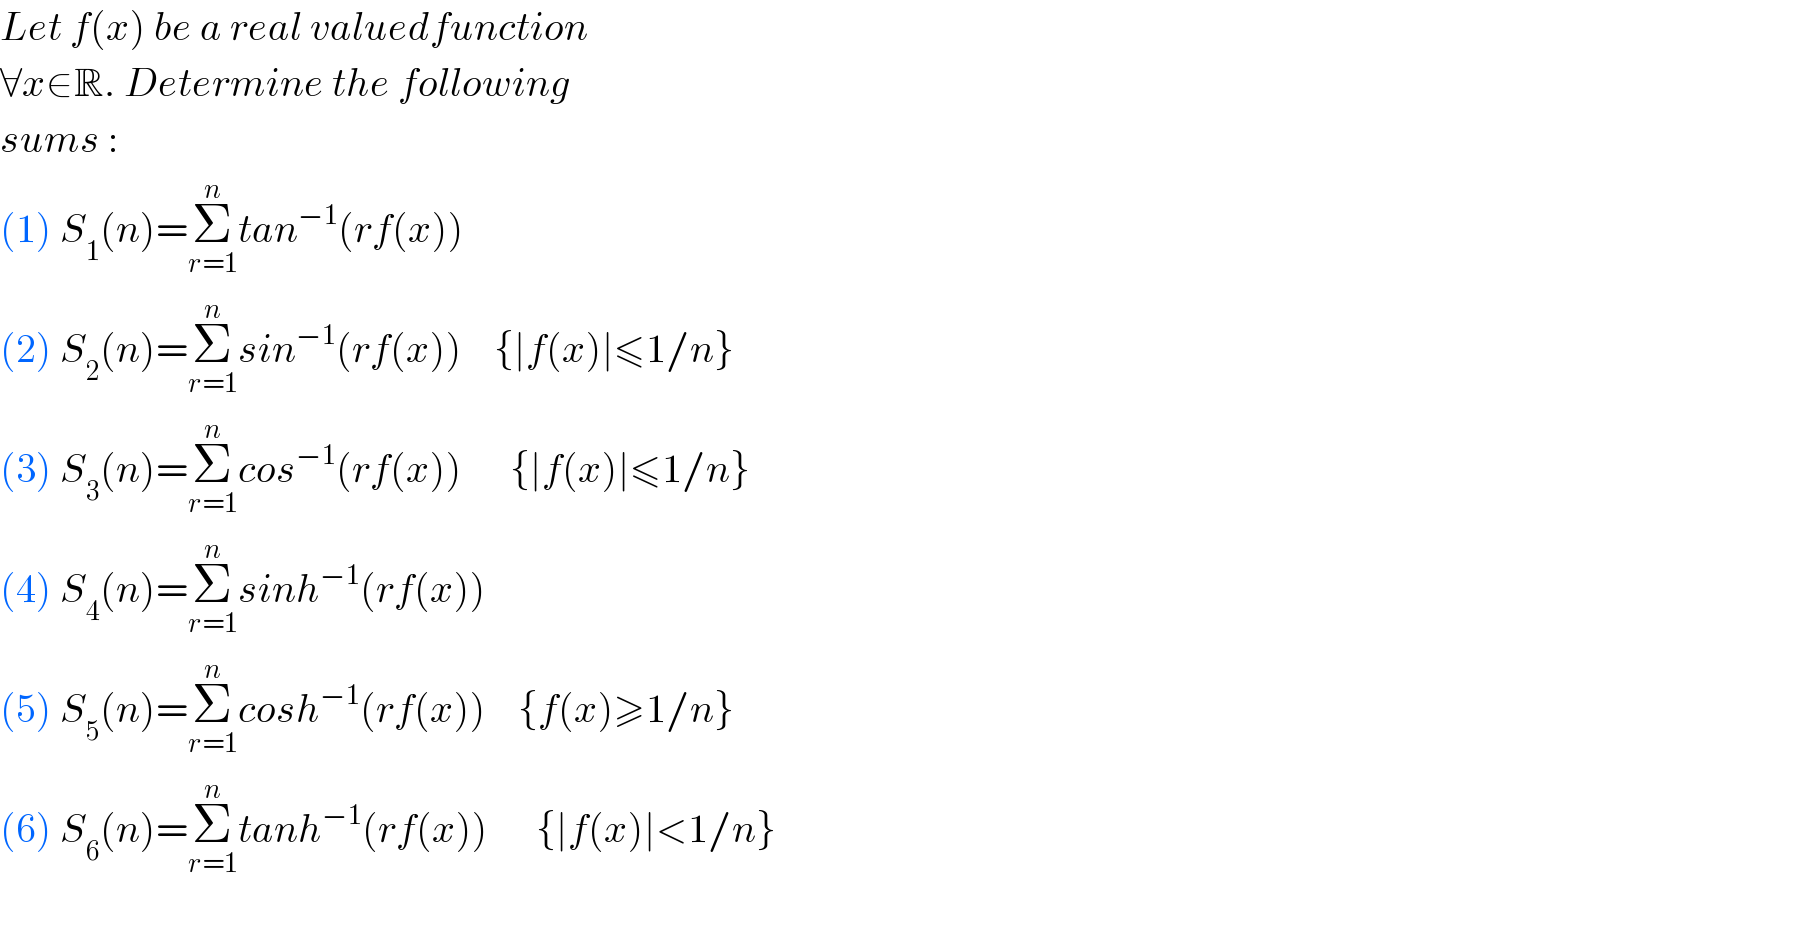 Let f(x) be a real valuedfunction  ∀x∈R. Determine the following  sums :  (1) S_1 (n)=Σ_(r=1) ^n tan^(−1) (rf(x))  (2) S_2 (n)=Σ_(r=1) ^n sin^(−1) (rf(x))    {∣f(x)∣≤1/n}  (3) S_3 (n)=Σ_(r=1) ^n cos^(−1) (rf(x))      {∣f(x)∣≤1/n}  (4) S_4 (n)=Σ_(r=1) ^n sinh^(−1) (rf(x))  (5) S_5 (n)=Σ_(r=1) ^n cosh^(−1) (rf(x))    {f(x)≥1/n}  (6) S_6 (n)=Σ_(r=1) ^n tanh^(−1) (rf(x))      {∣f(x)∣<1/n}    